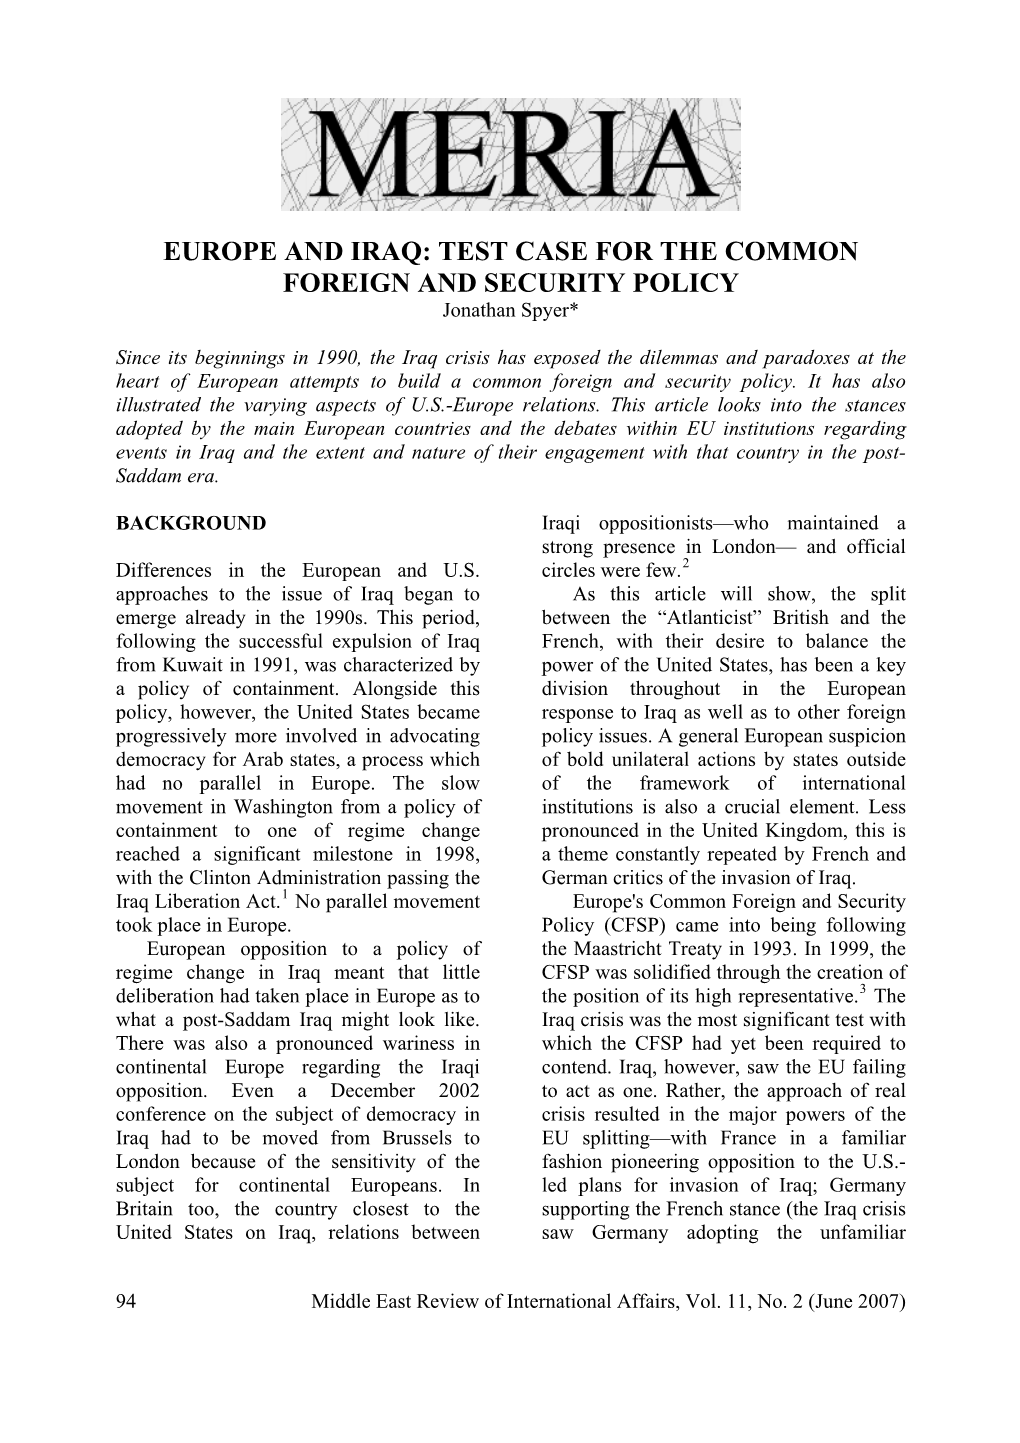 Europe and Iraq: Test Case for the Common Foreign and Security Policy -- MERIA -- June 2007 (Vol. 11, No. 2)